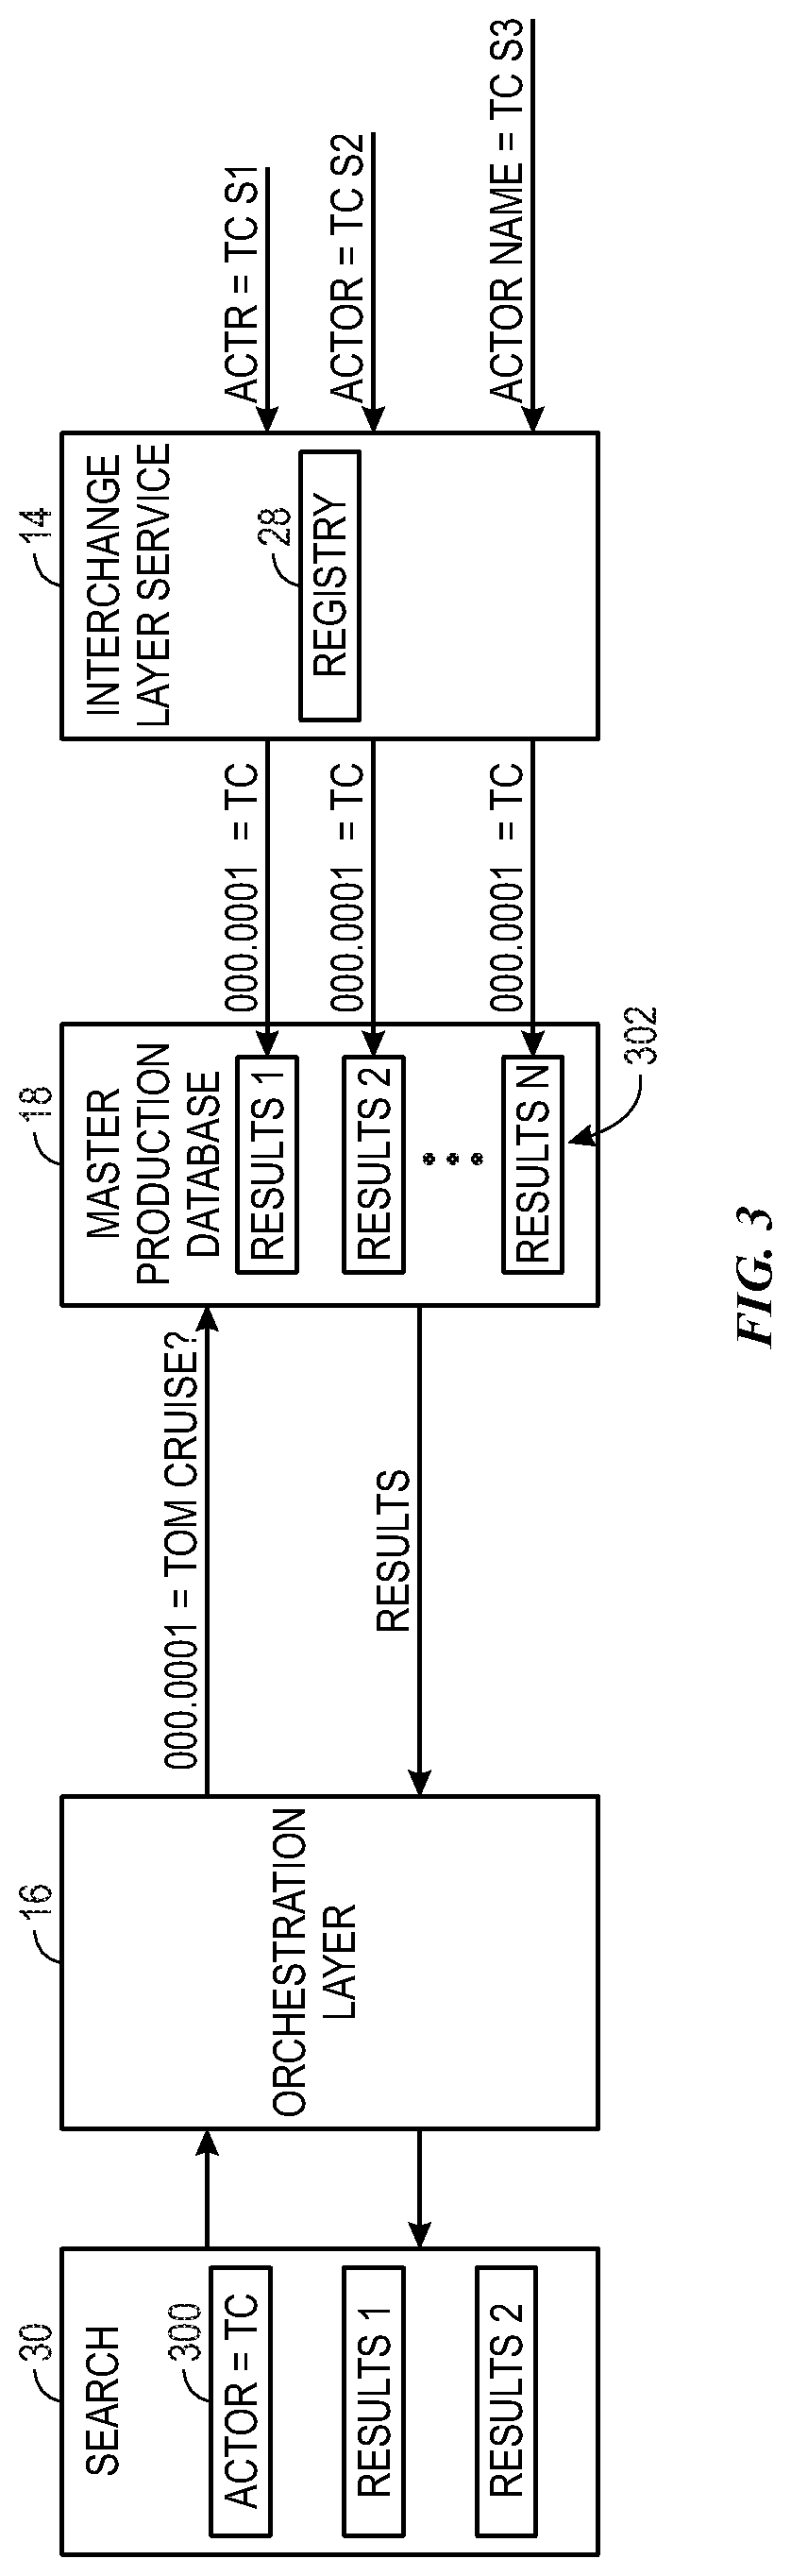 Systems and methods for processing metadata